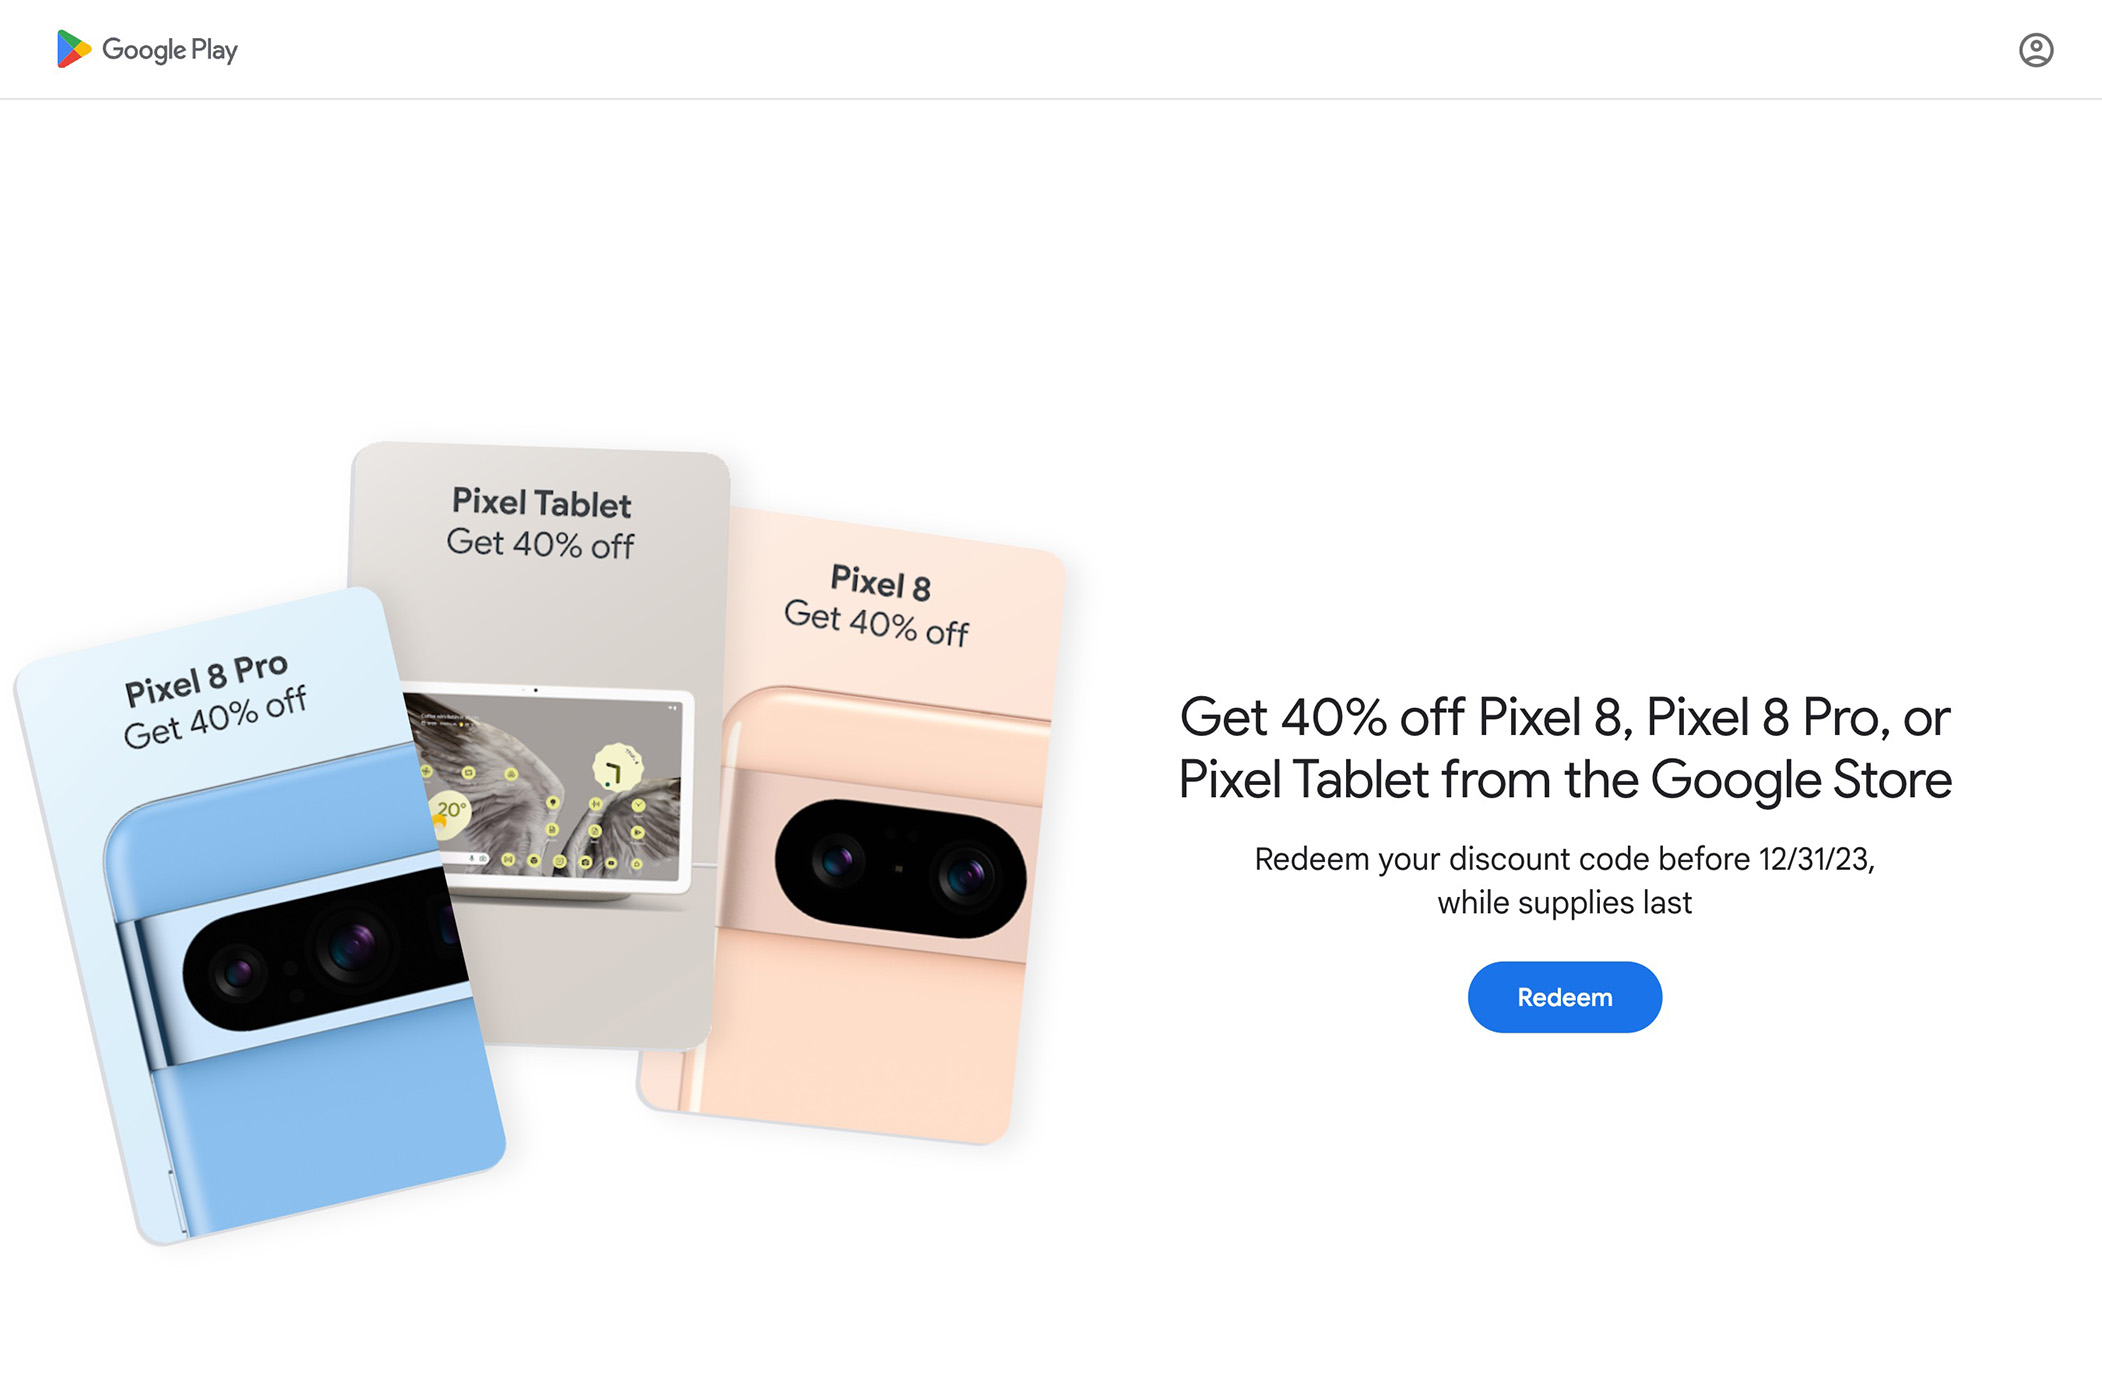 Google Store for Google Made Devices & Accessories